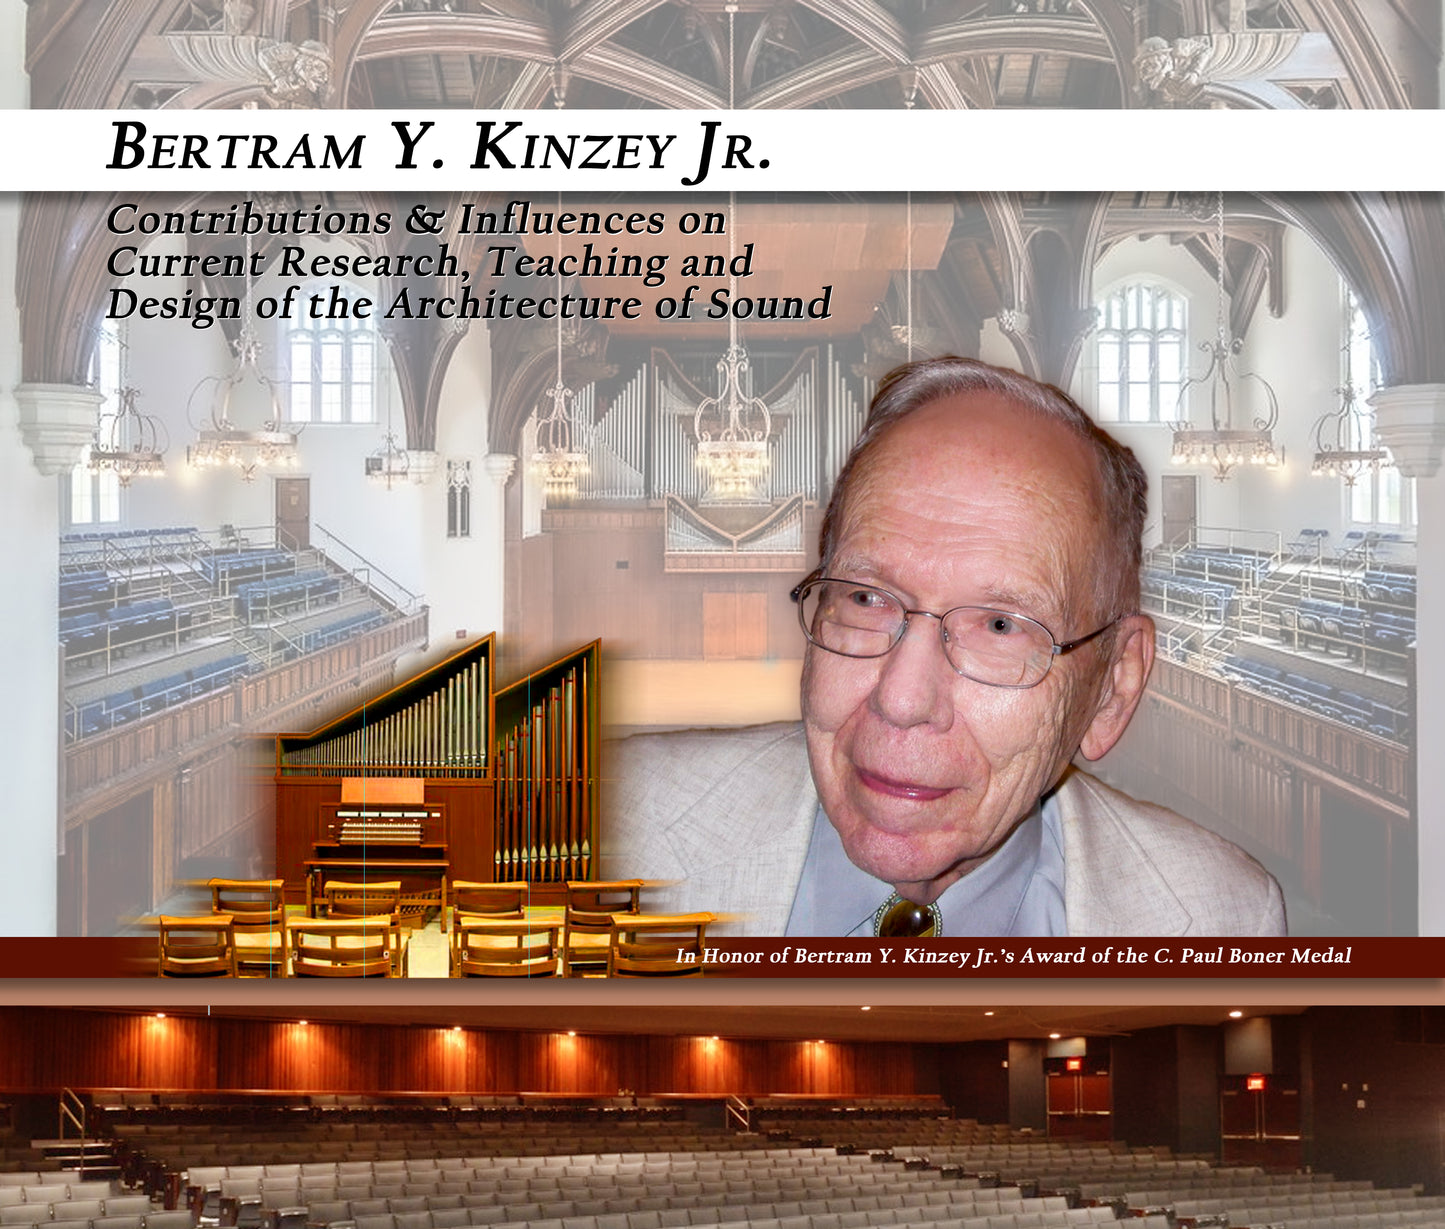 E-BOOK Bertram Y. Kinzey Jr. Contributions and Influences on Current Research, Teaching and Design of the Architecture of Sound